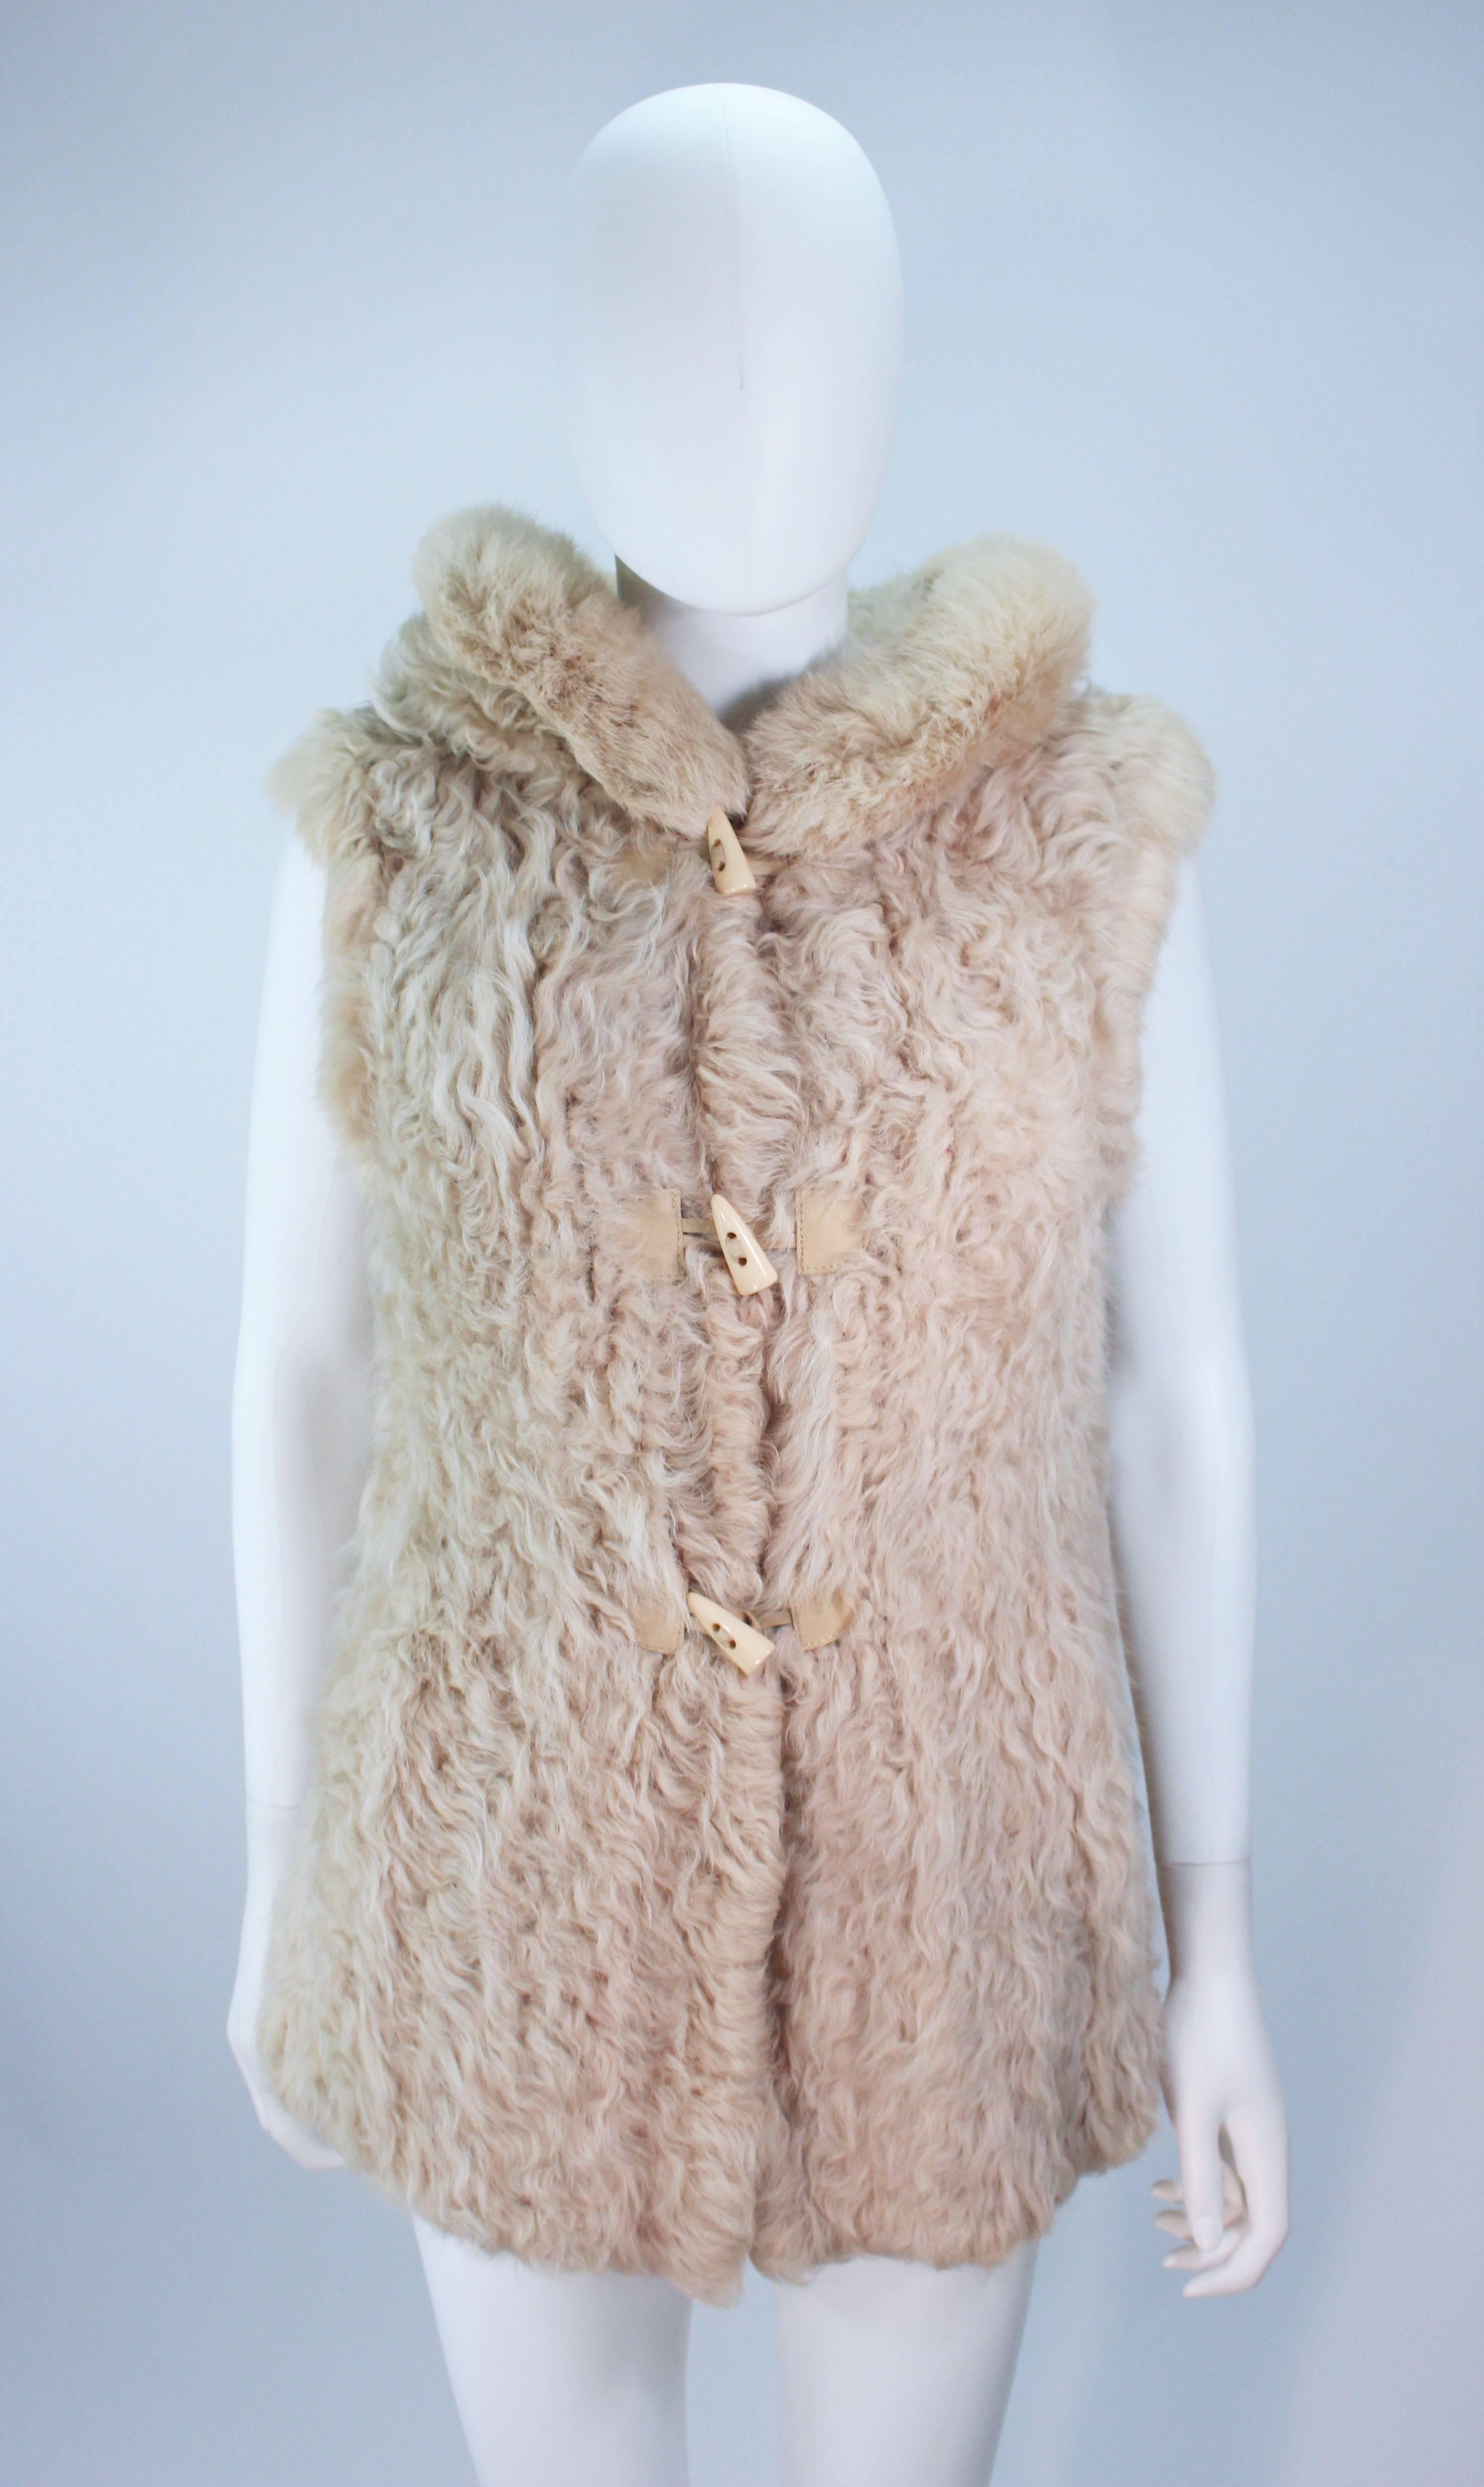  This Neiman Marcus Vest is composed of a lamb and rabbit fur combination. Features toggle closures and a generous sized hood. In excellent condition. 

  **Please cross-reference measurements for personal accuracy.  

Measures